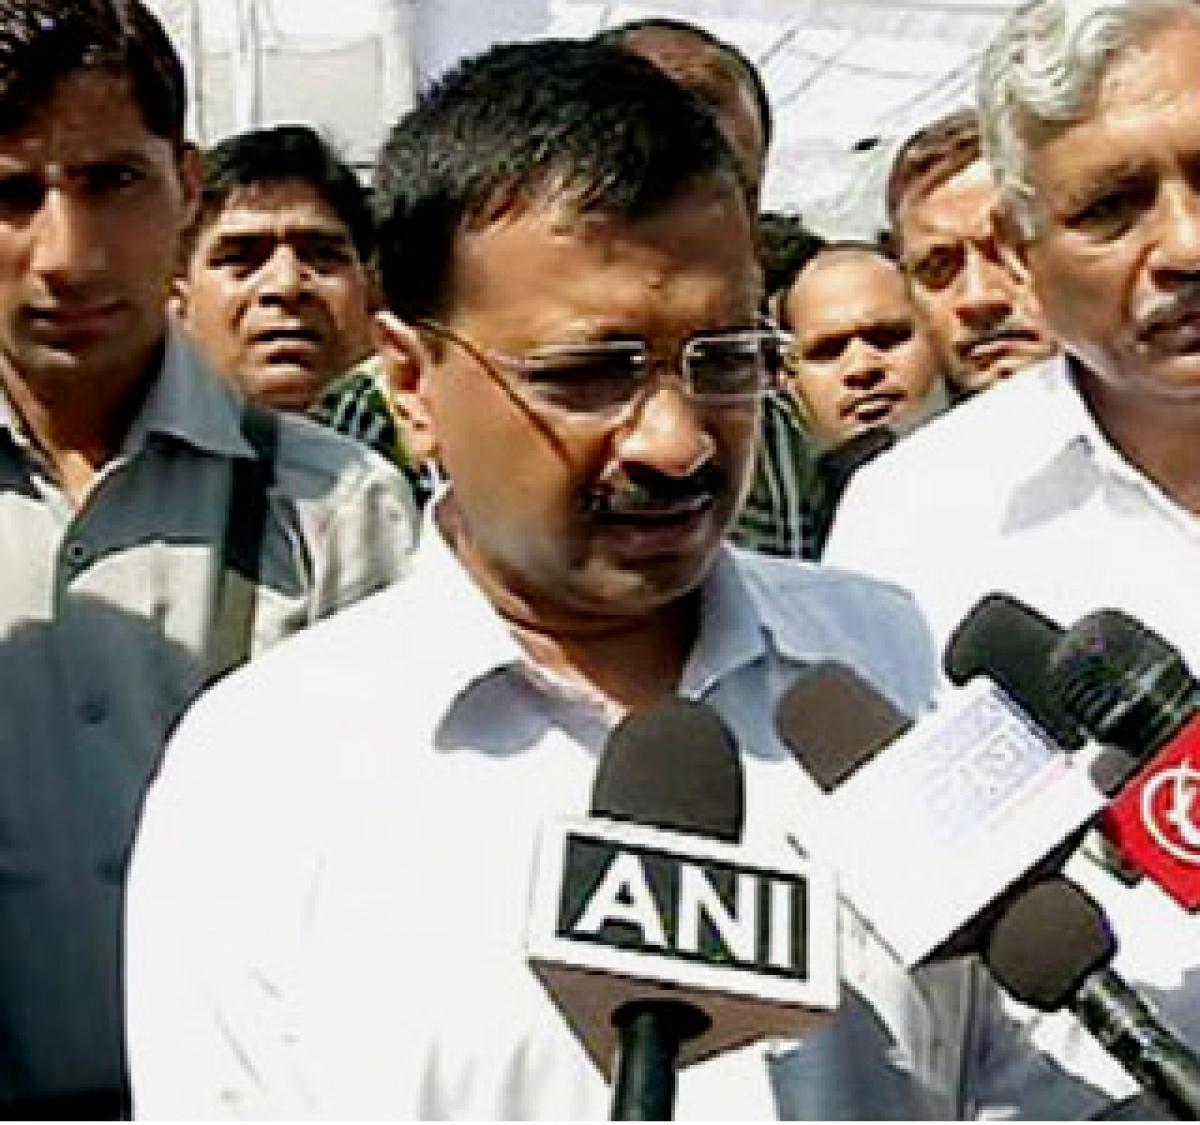 Kejriwal to talk less, work more on Swachch Bharat